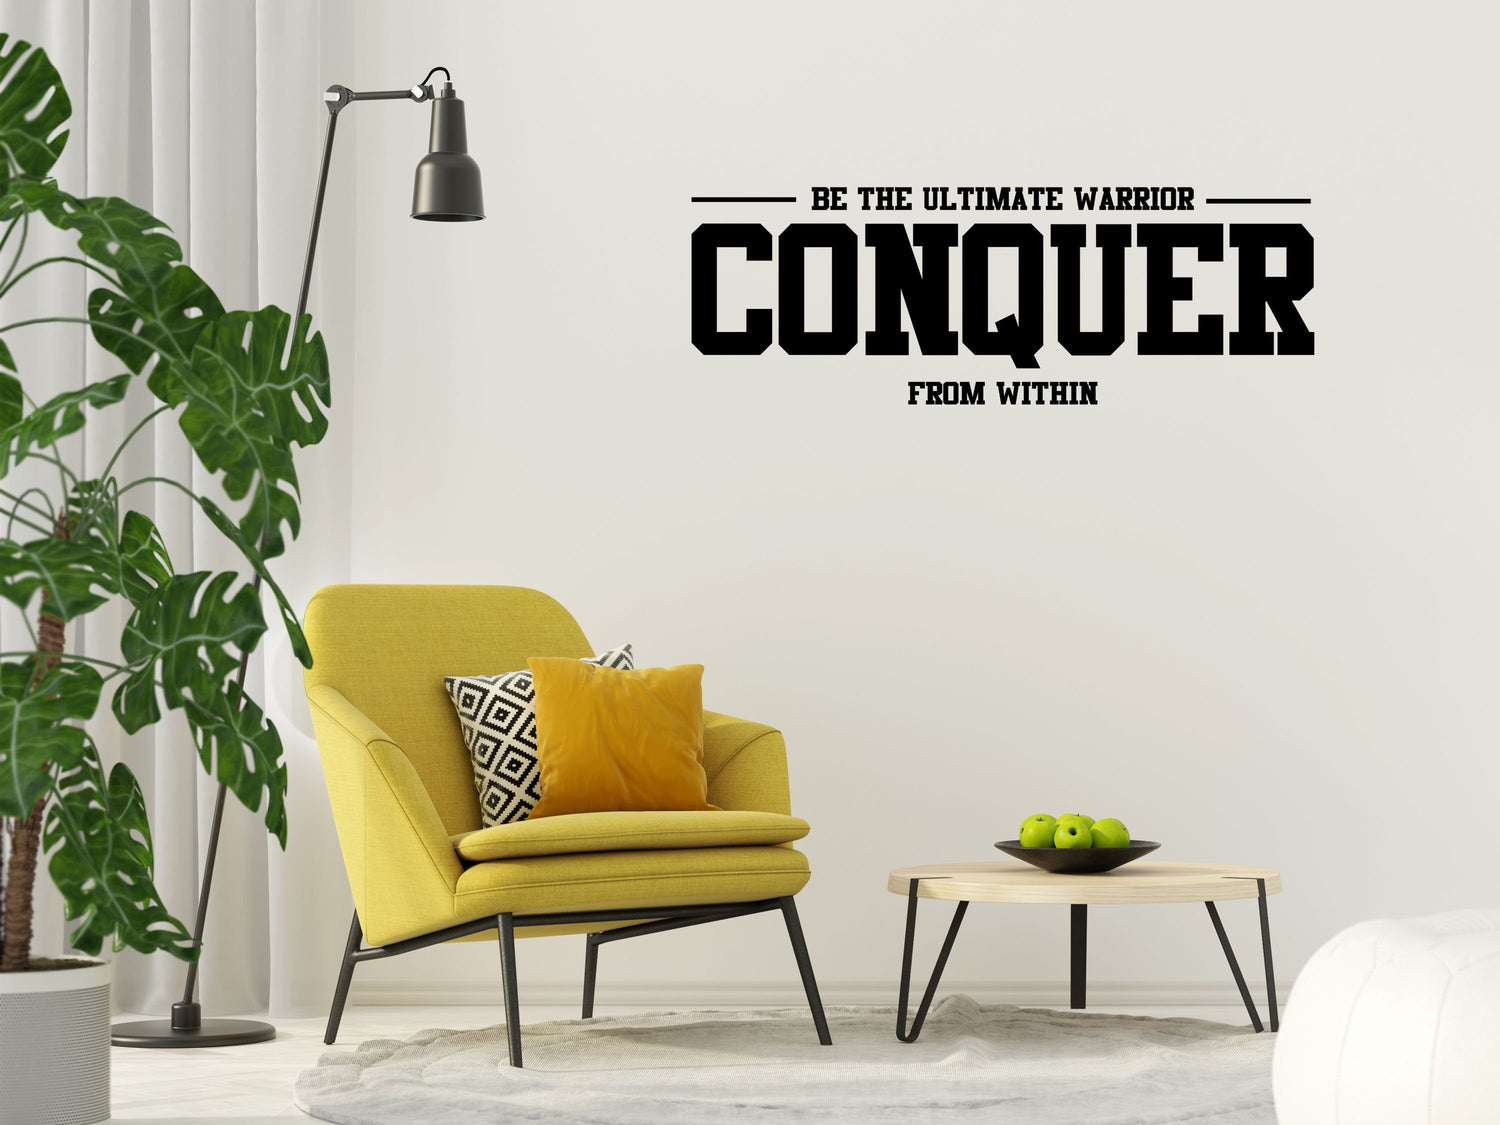 Be The Ultimate Warrior - Warrior Wall Decal - Fitness Room Decor - Conquer From Within - Ultimate Warrior Decal Done 